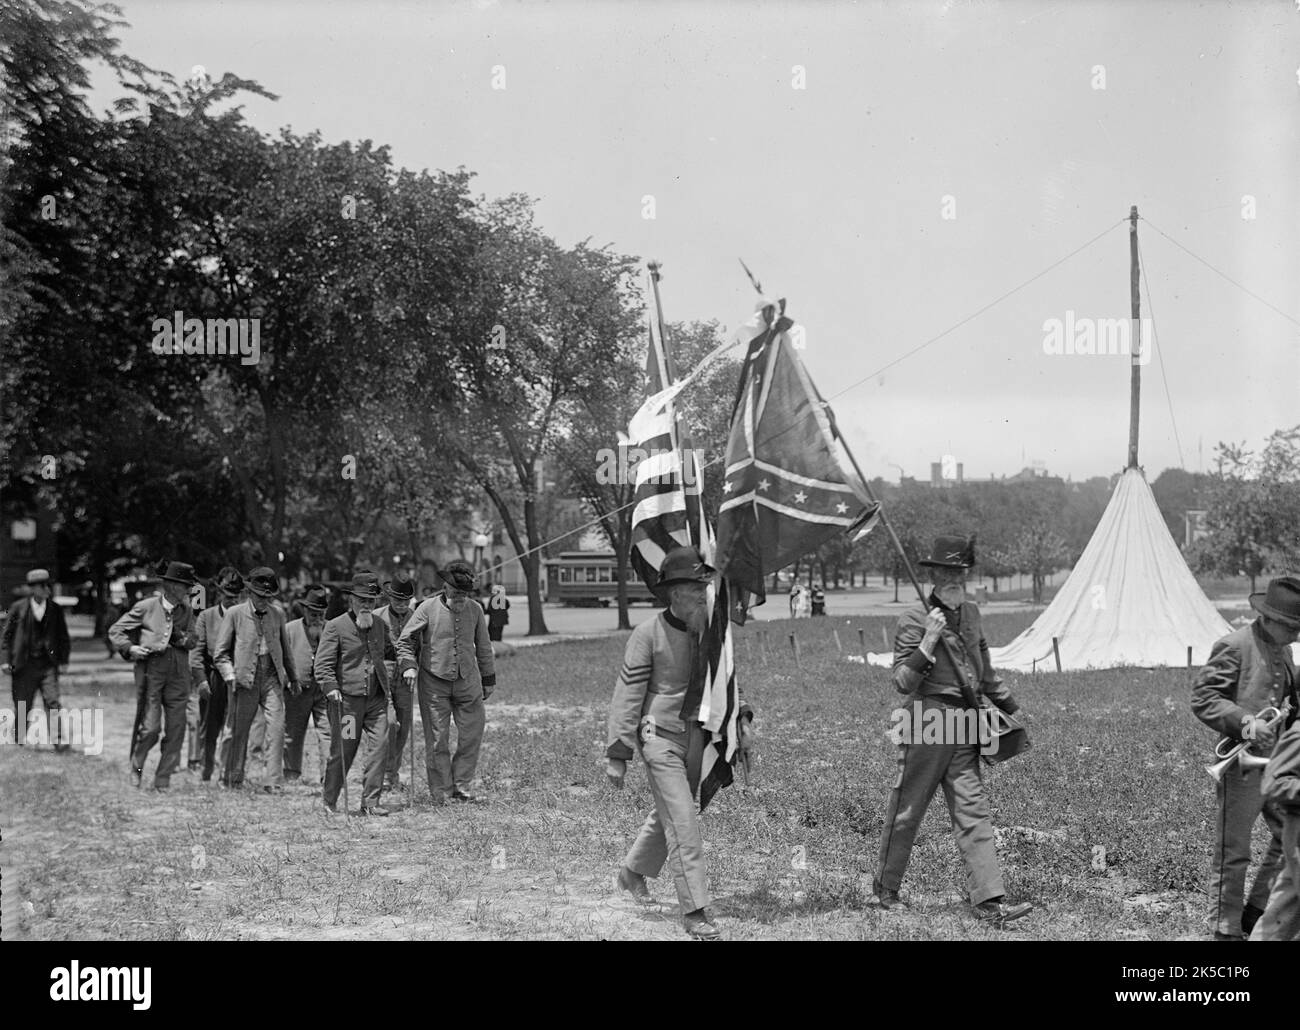 Confederate Reunion - North Carolina Veterans with Flag, 1917. Old soldiers from the southern USA with confederate flag, Washington D.C. Stock Photo